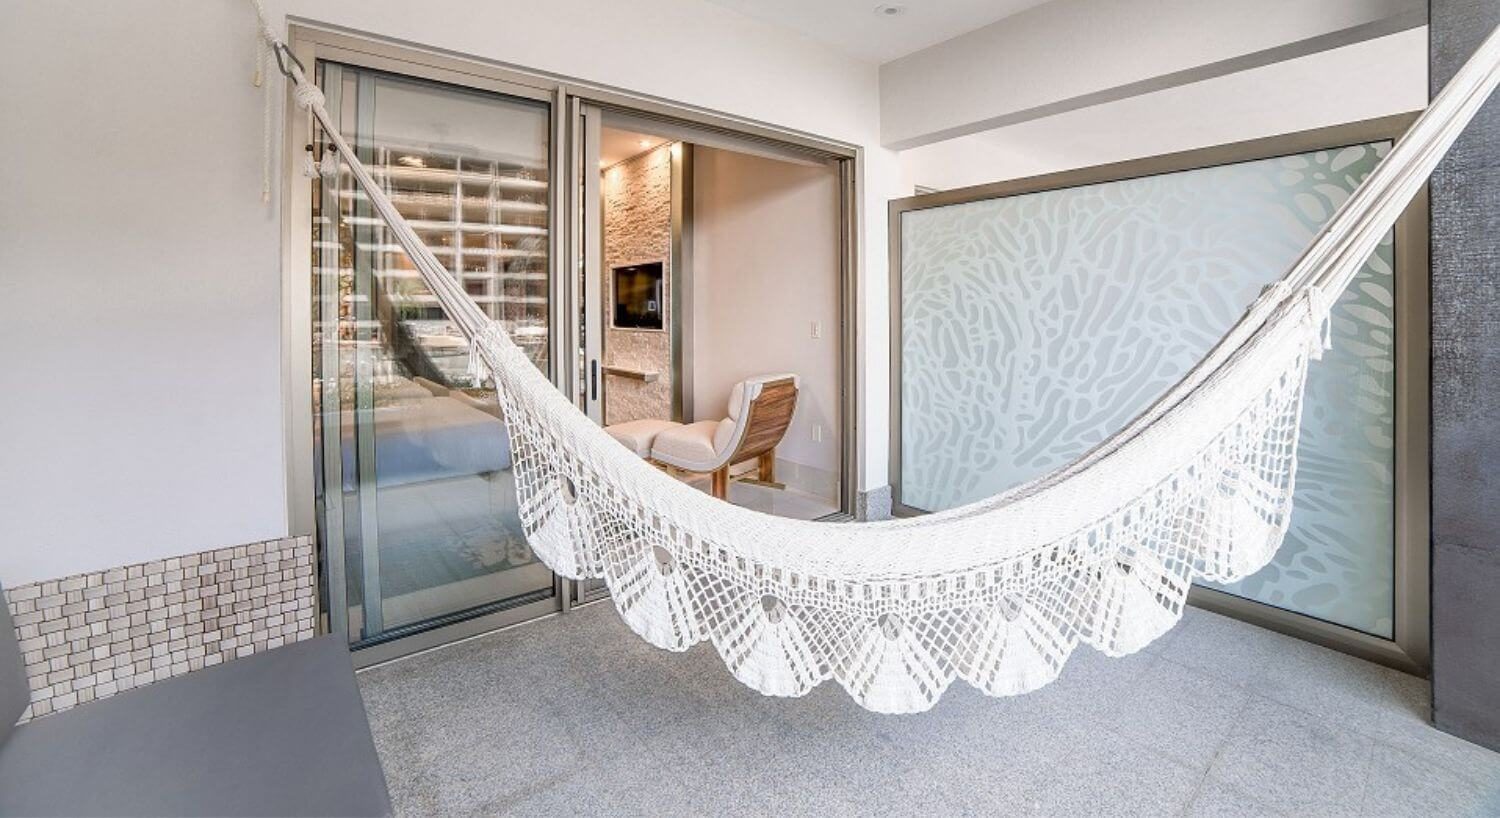 A balcony with a hammock and patio furniture, and a sliding door into a living room.